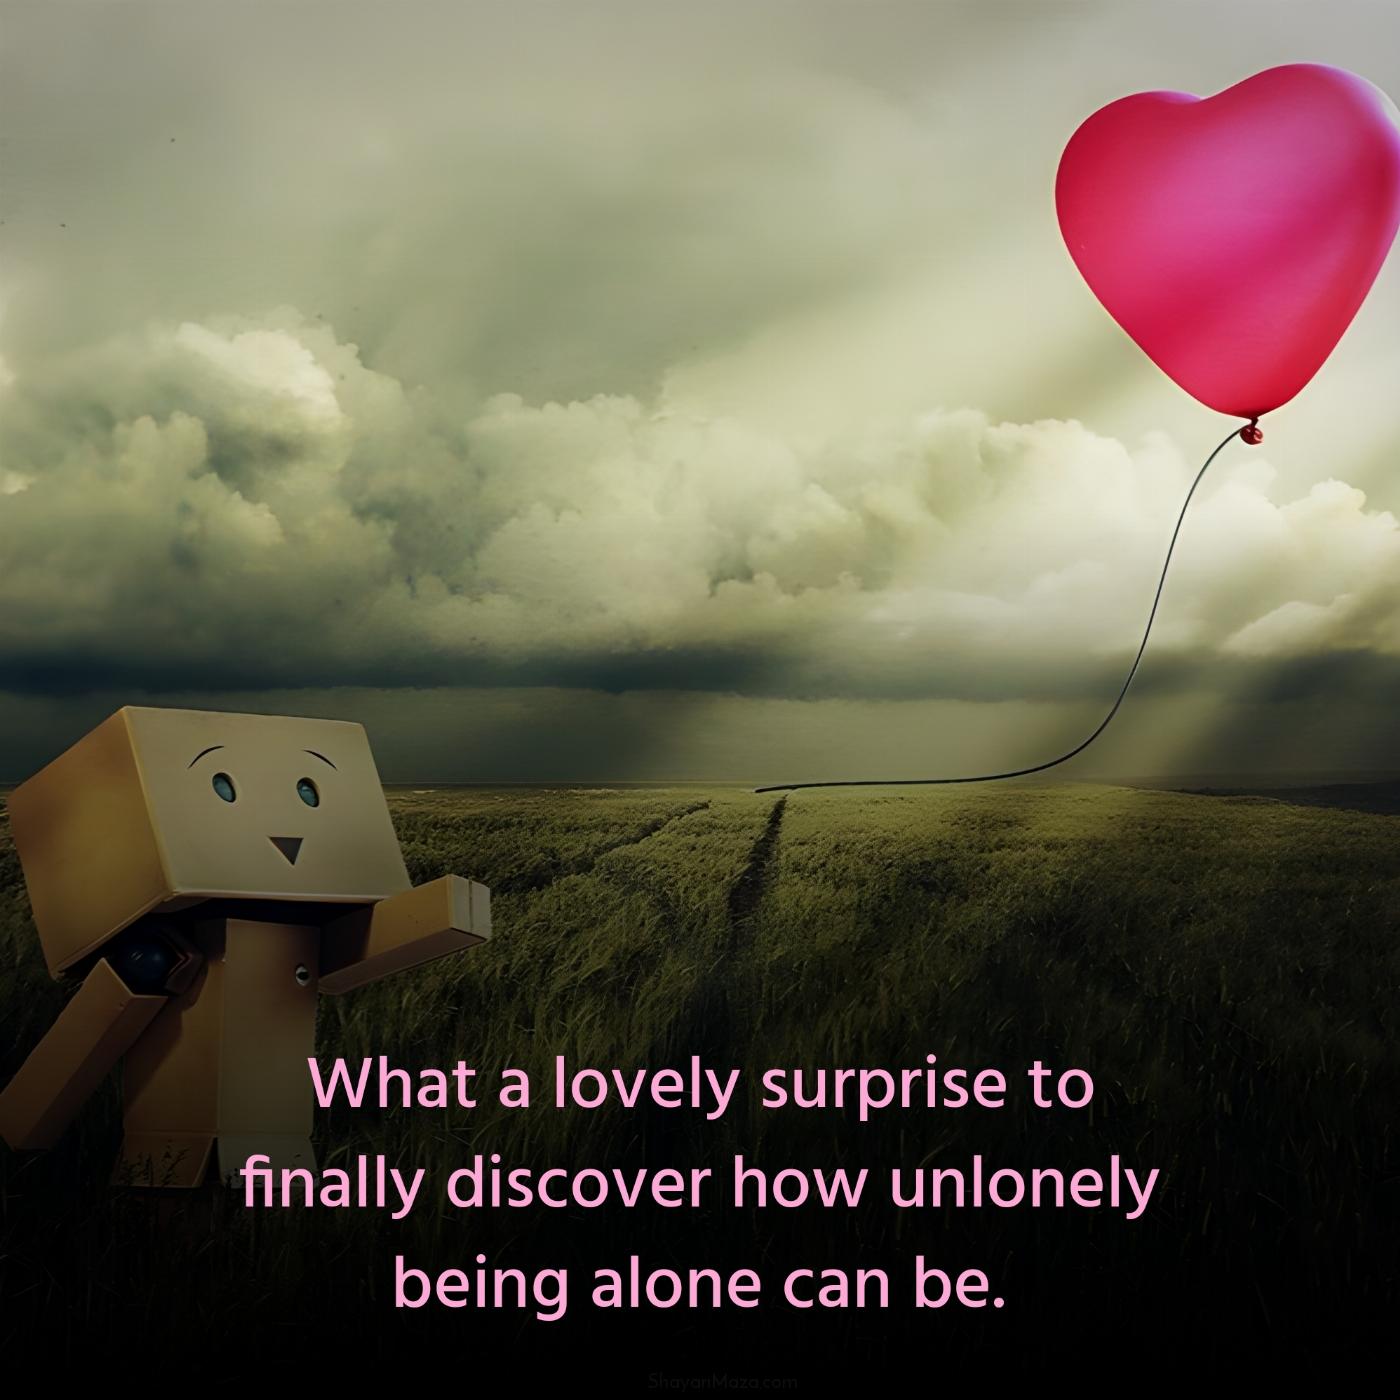 What a lovely surprise to finally discover how unlonely being alone